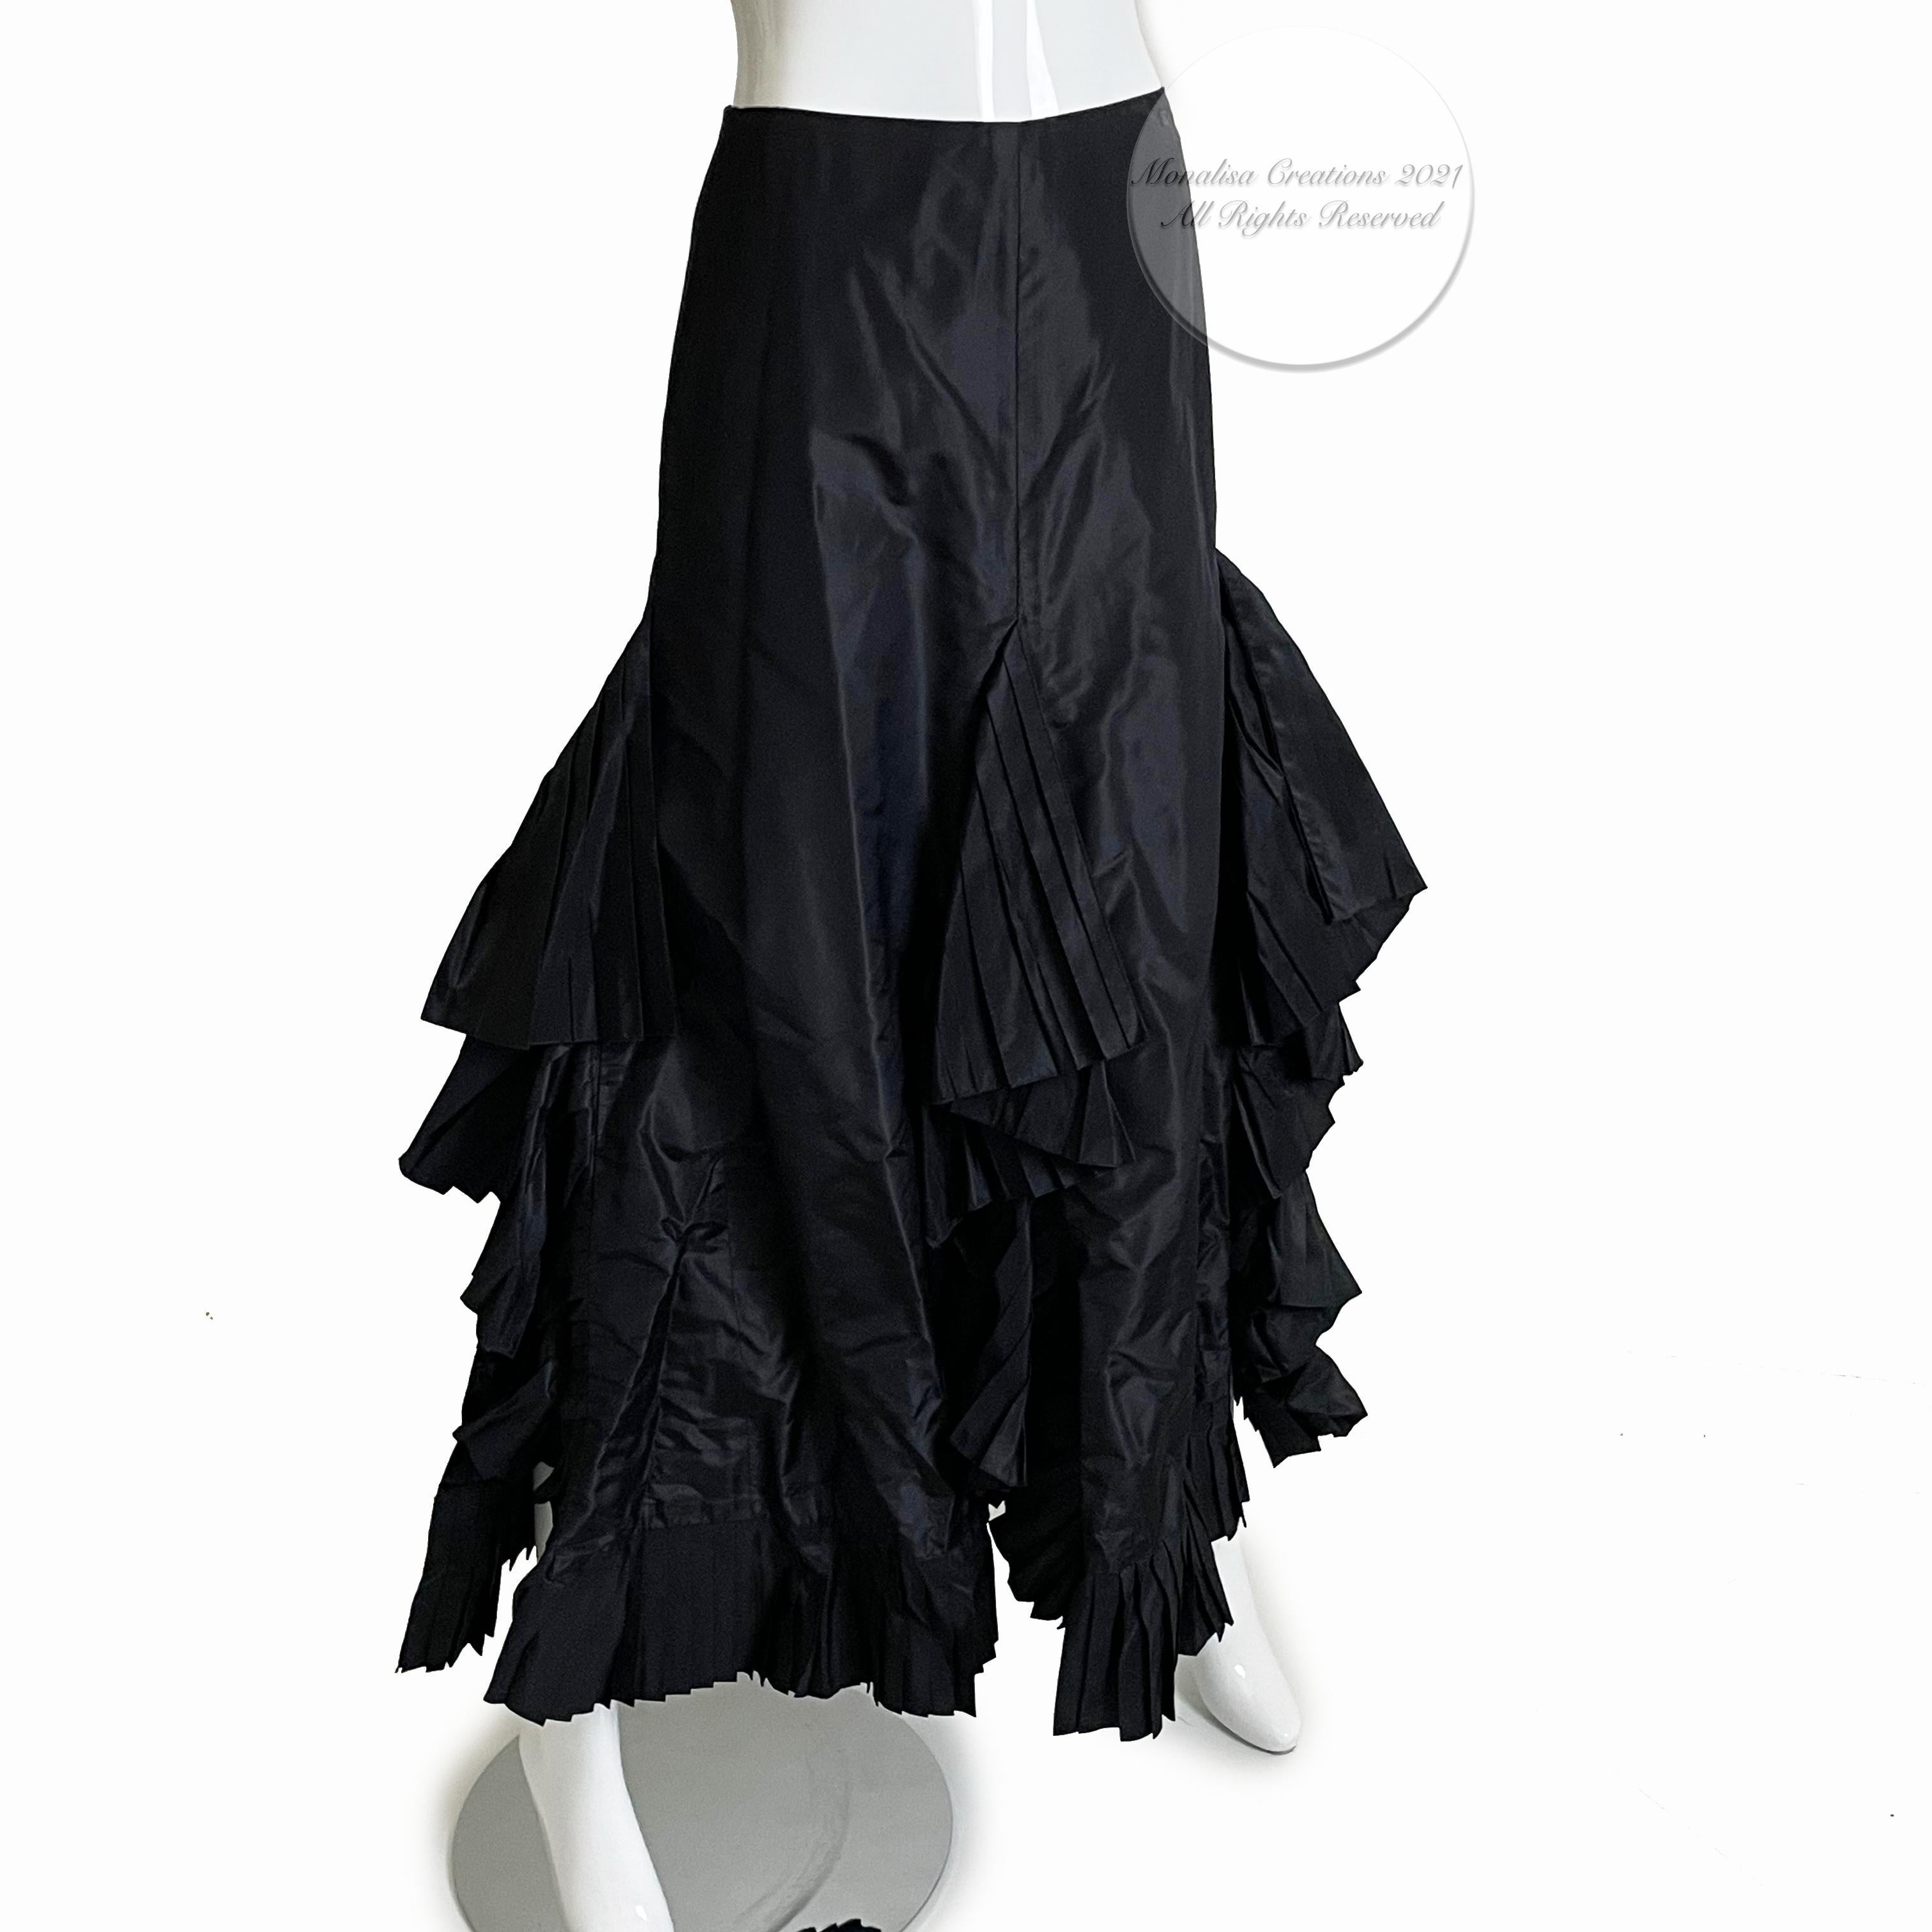 This incredible silk taffeta skirt is constructed with panels of pleated ruffle fabric, fitted at the waist and hips, and features an asymmetric hem.  One flat pocket can be found at each hip, and there is one rhinestone-encrusted CC on the left